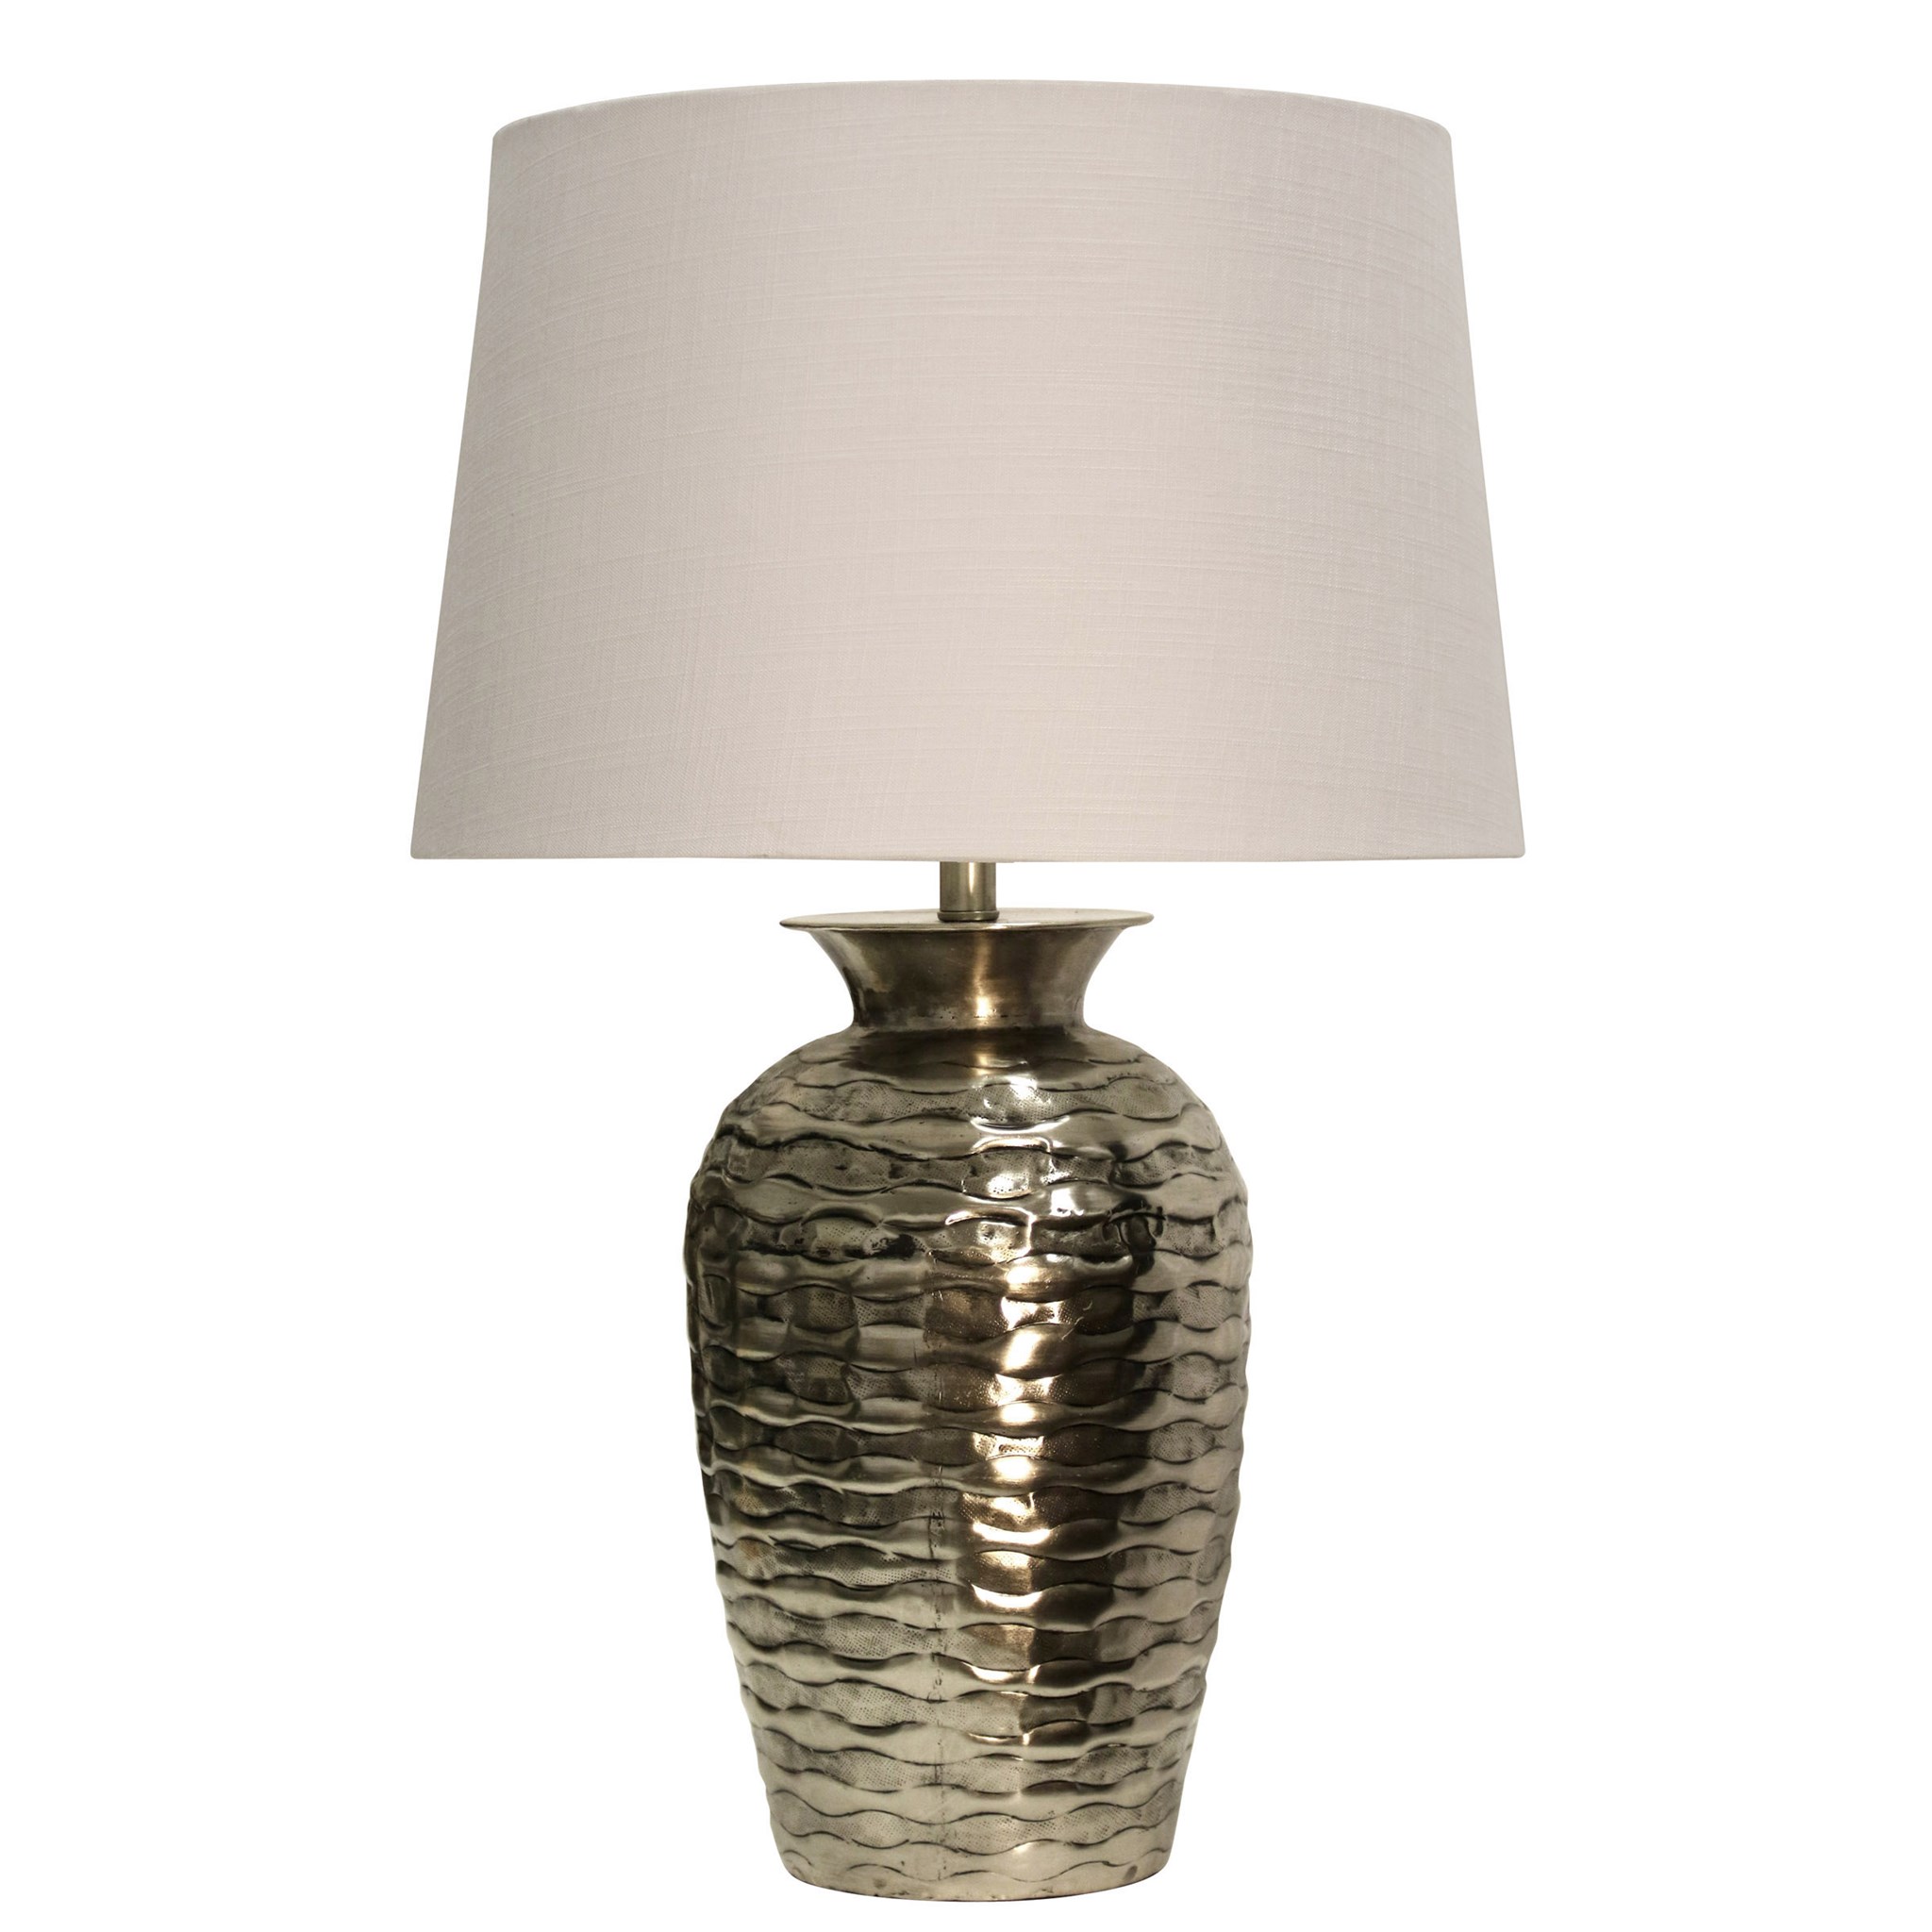 Hammered Design in Aged Silver Metal Base Table Lamp ...